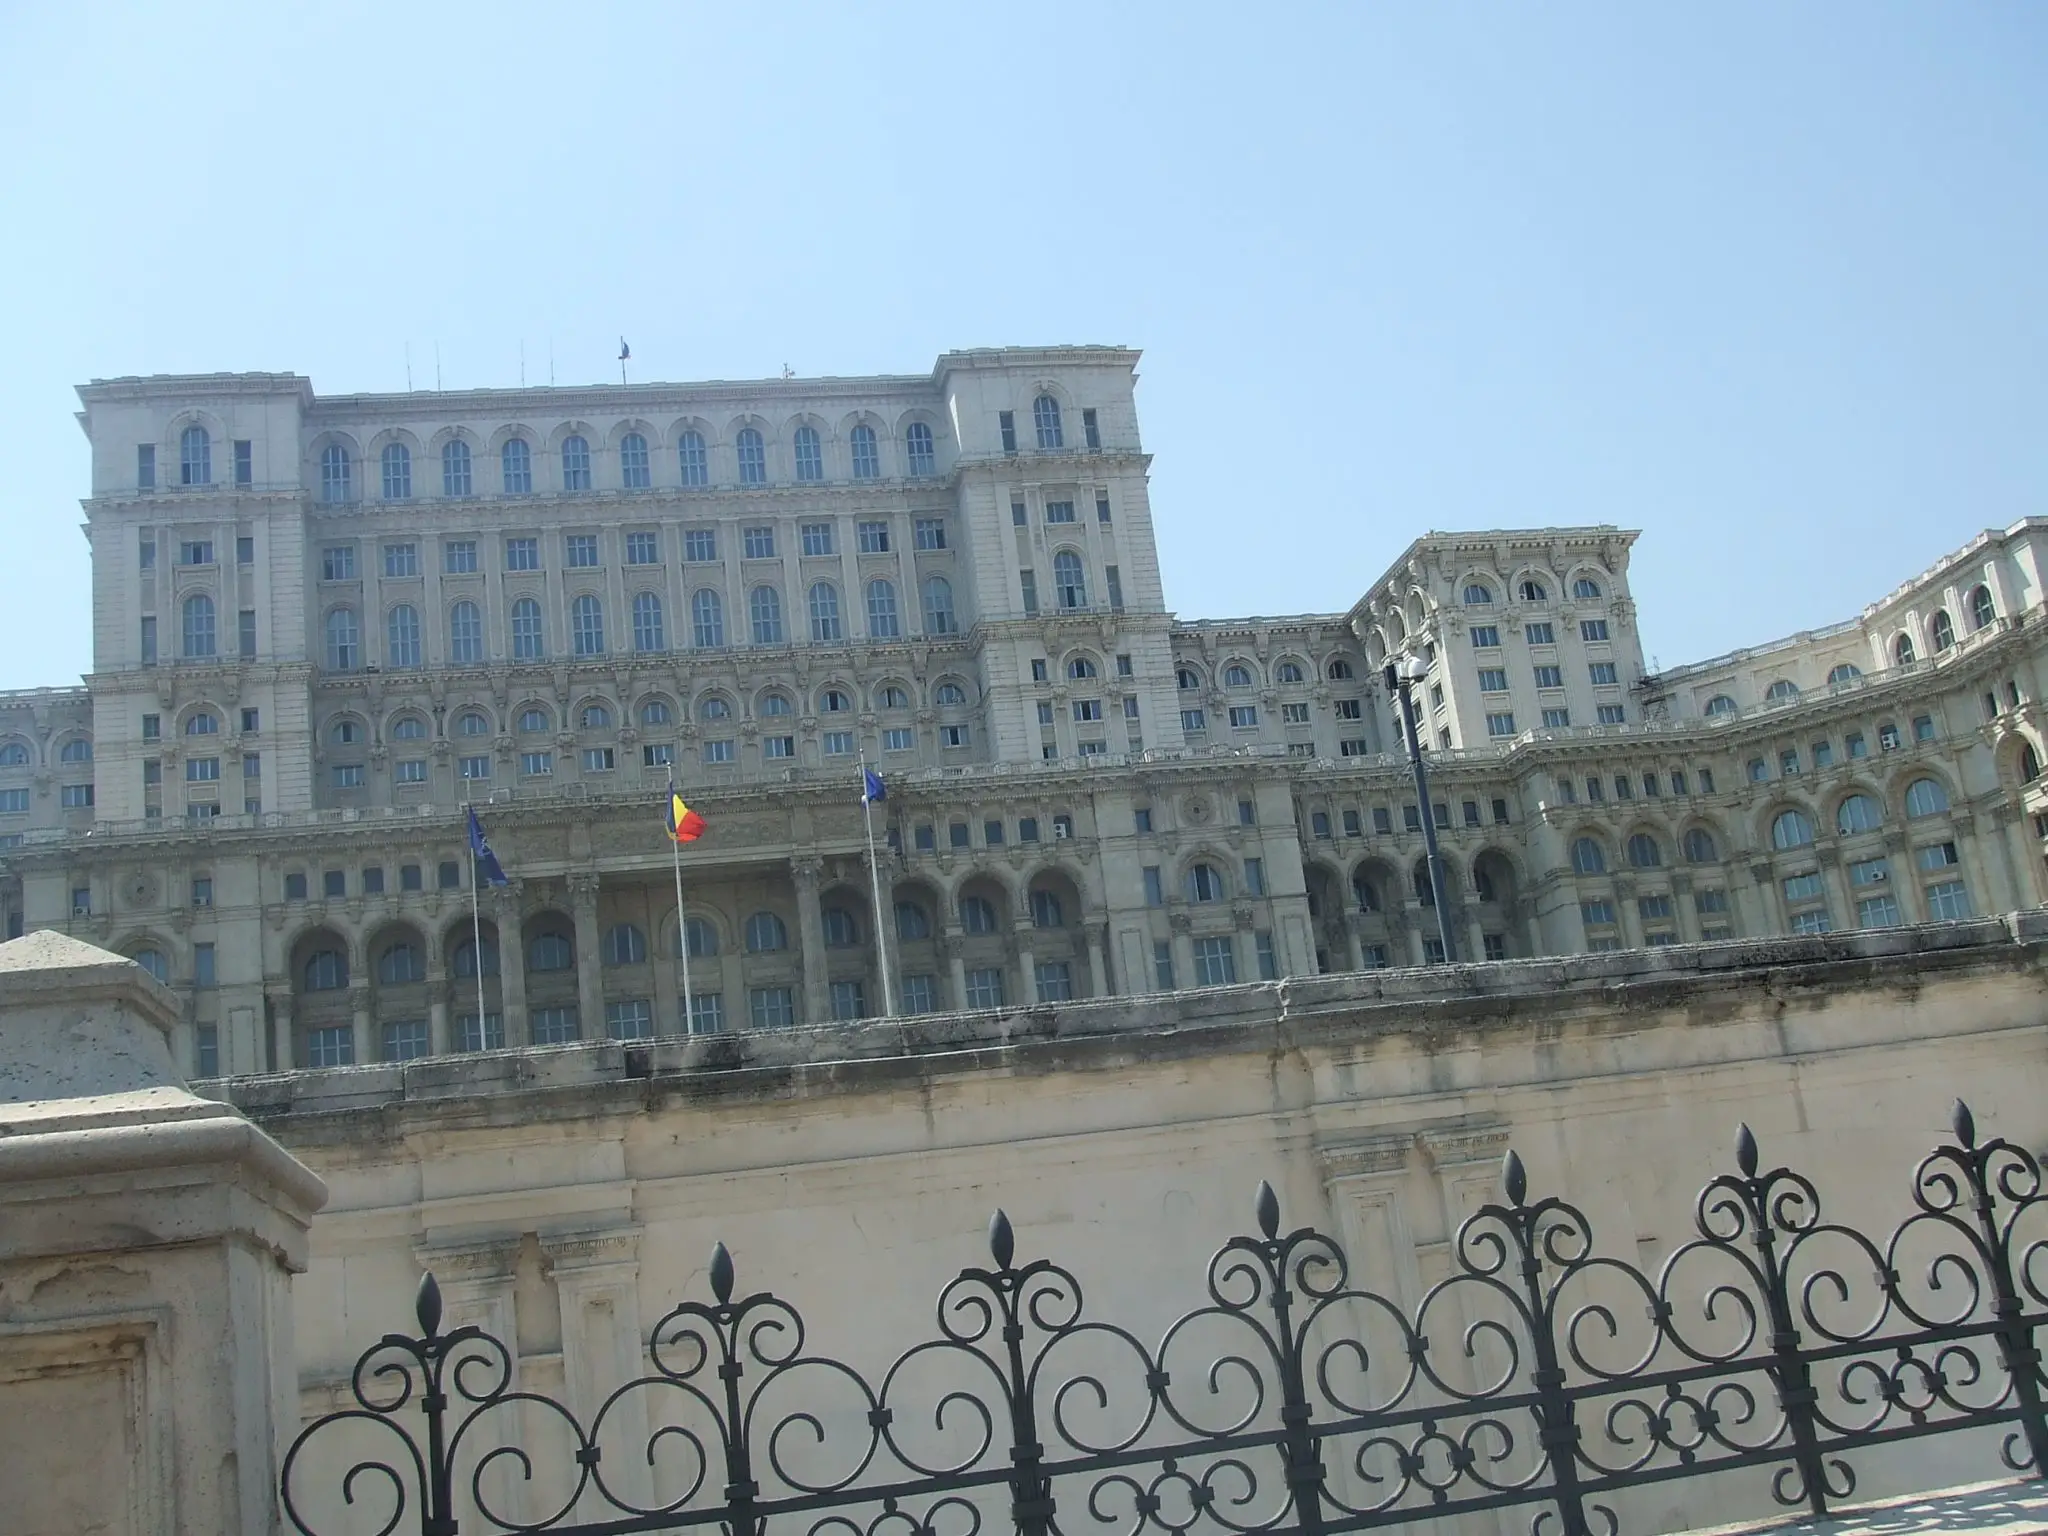 The Romanian palace built by a dictator